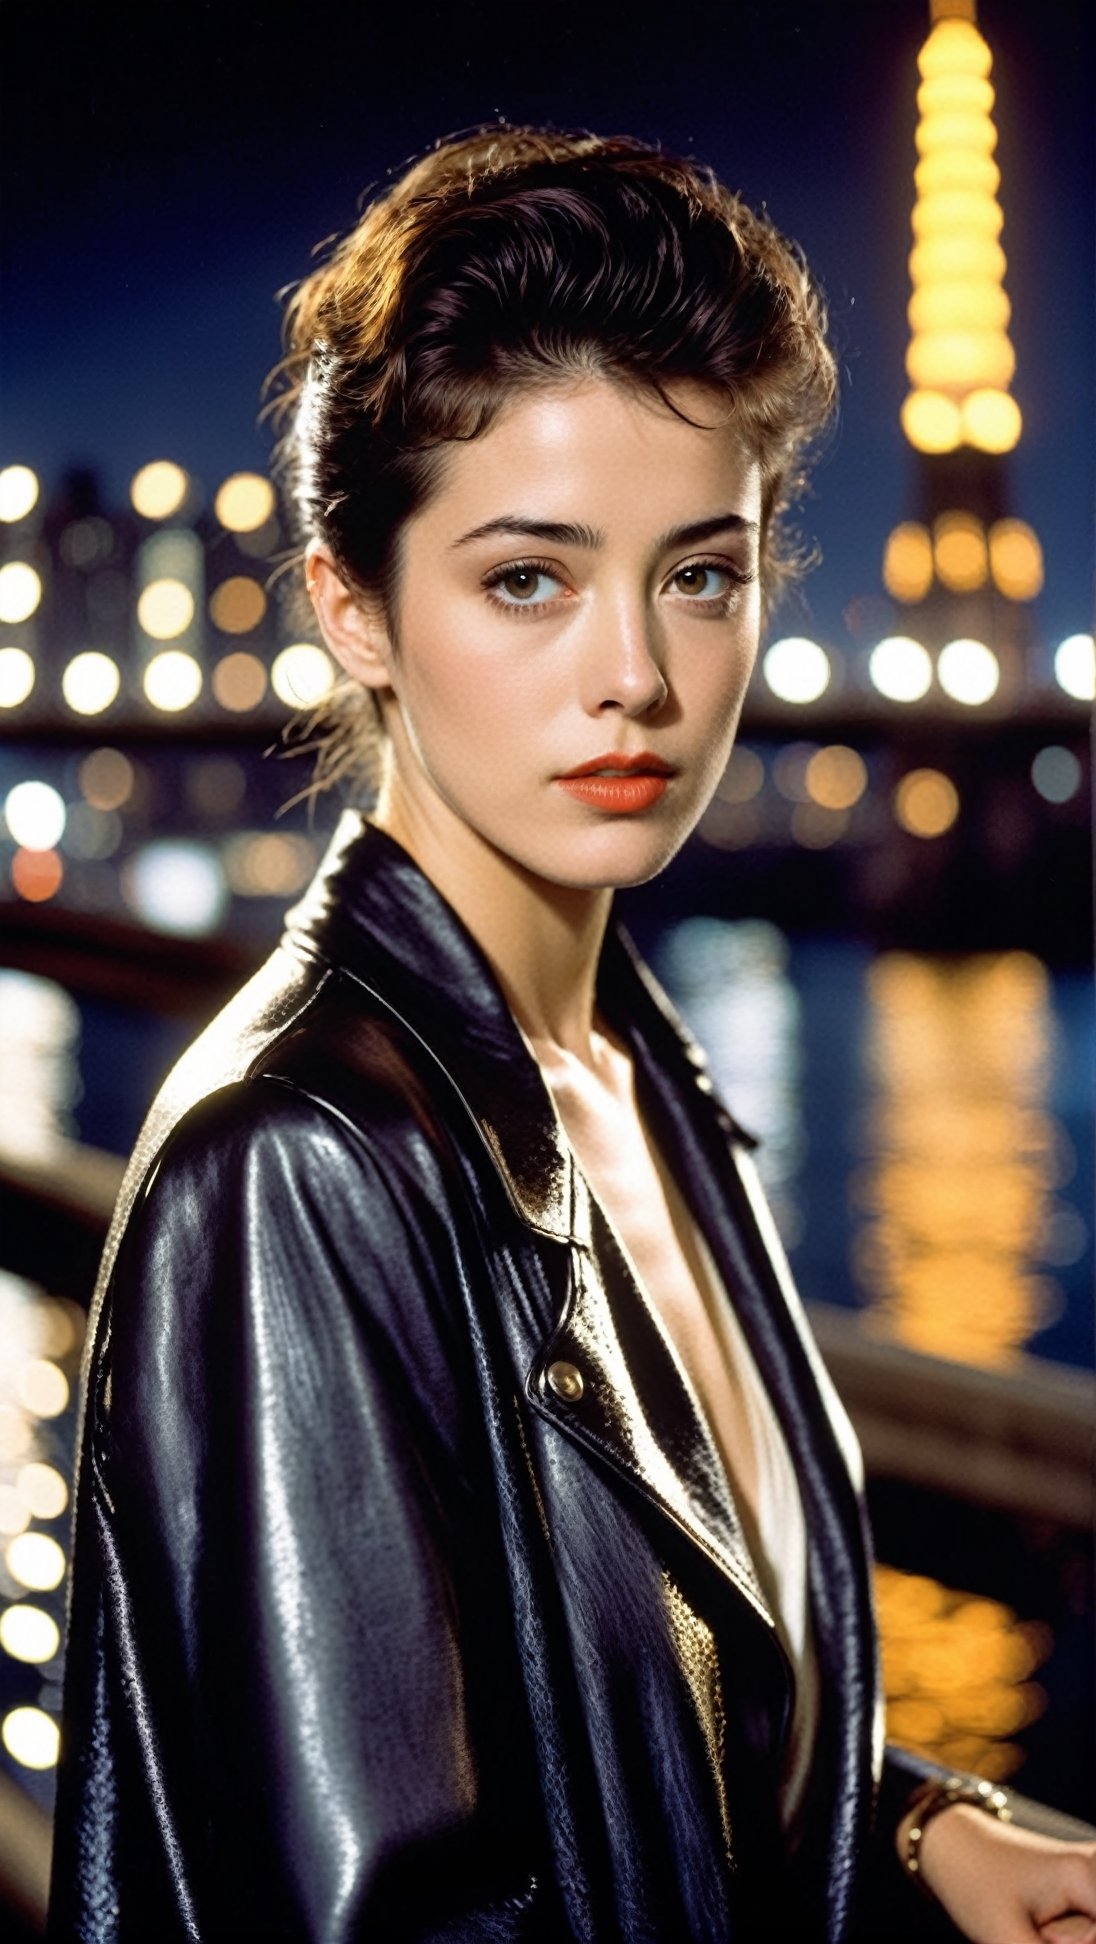 Here's a prompt for generating an image:

A 20-year-old girl \(Sean Young\)stands solo on a bridge at night, her gaze directed straight into the camera lens. Inspired by Sean Young's iconic pose in Blade Runner. Her facial features are hyper-realistically rendered, showcasing perfect skin tone and clear definition. The model body is toned and athletic, with a striking female form. Against the blurred backdrop of a beautiful River, the cityscape twinkles with lights, tower silhouettes, and bustling activity.

The composition is masterfully crafted to follow the rule of thirds (1.3), placing the subject off-center for a visually appealing shot. The studio lighting creates a dramatic chiaroscuro effect, accentuating the girl's features and adding depth to the scene.

Image specifications: 32k resolution, UHD quality, perfect focus, high contrast, HDR, hyper-detailed, intricate details, ultra-realistic, and award-winning photography. Kodachrome 800 film-inspired texture adds an extra layer of authenticity. Created by a collective of renowned photographers Antonio Lopez, Diego Koi, Karol Bak, and Hayao Miyazaki.